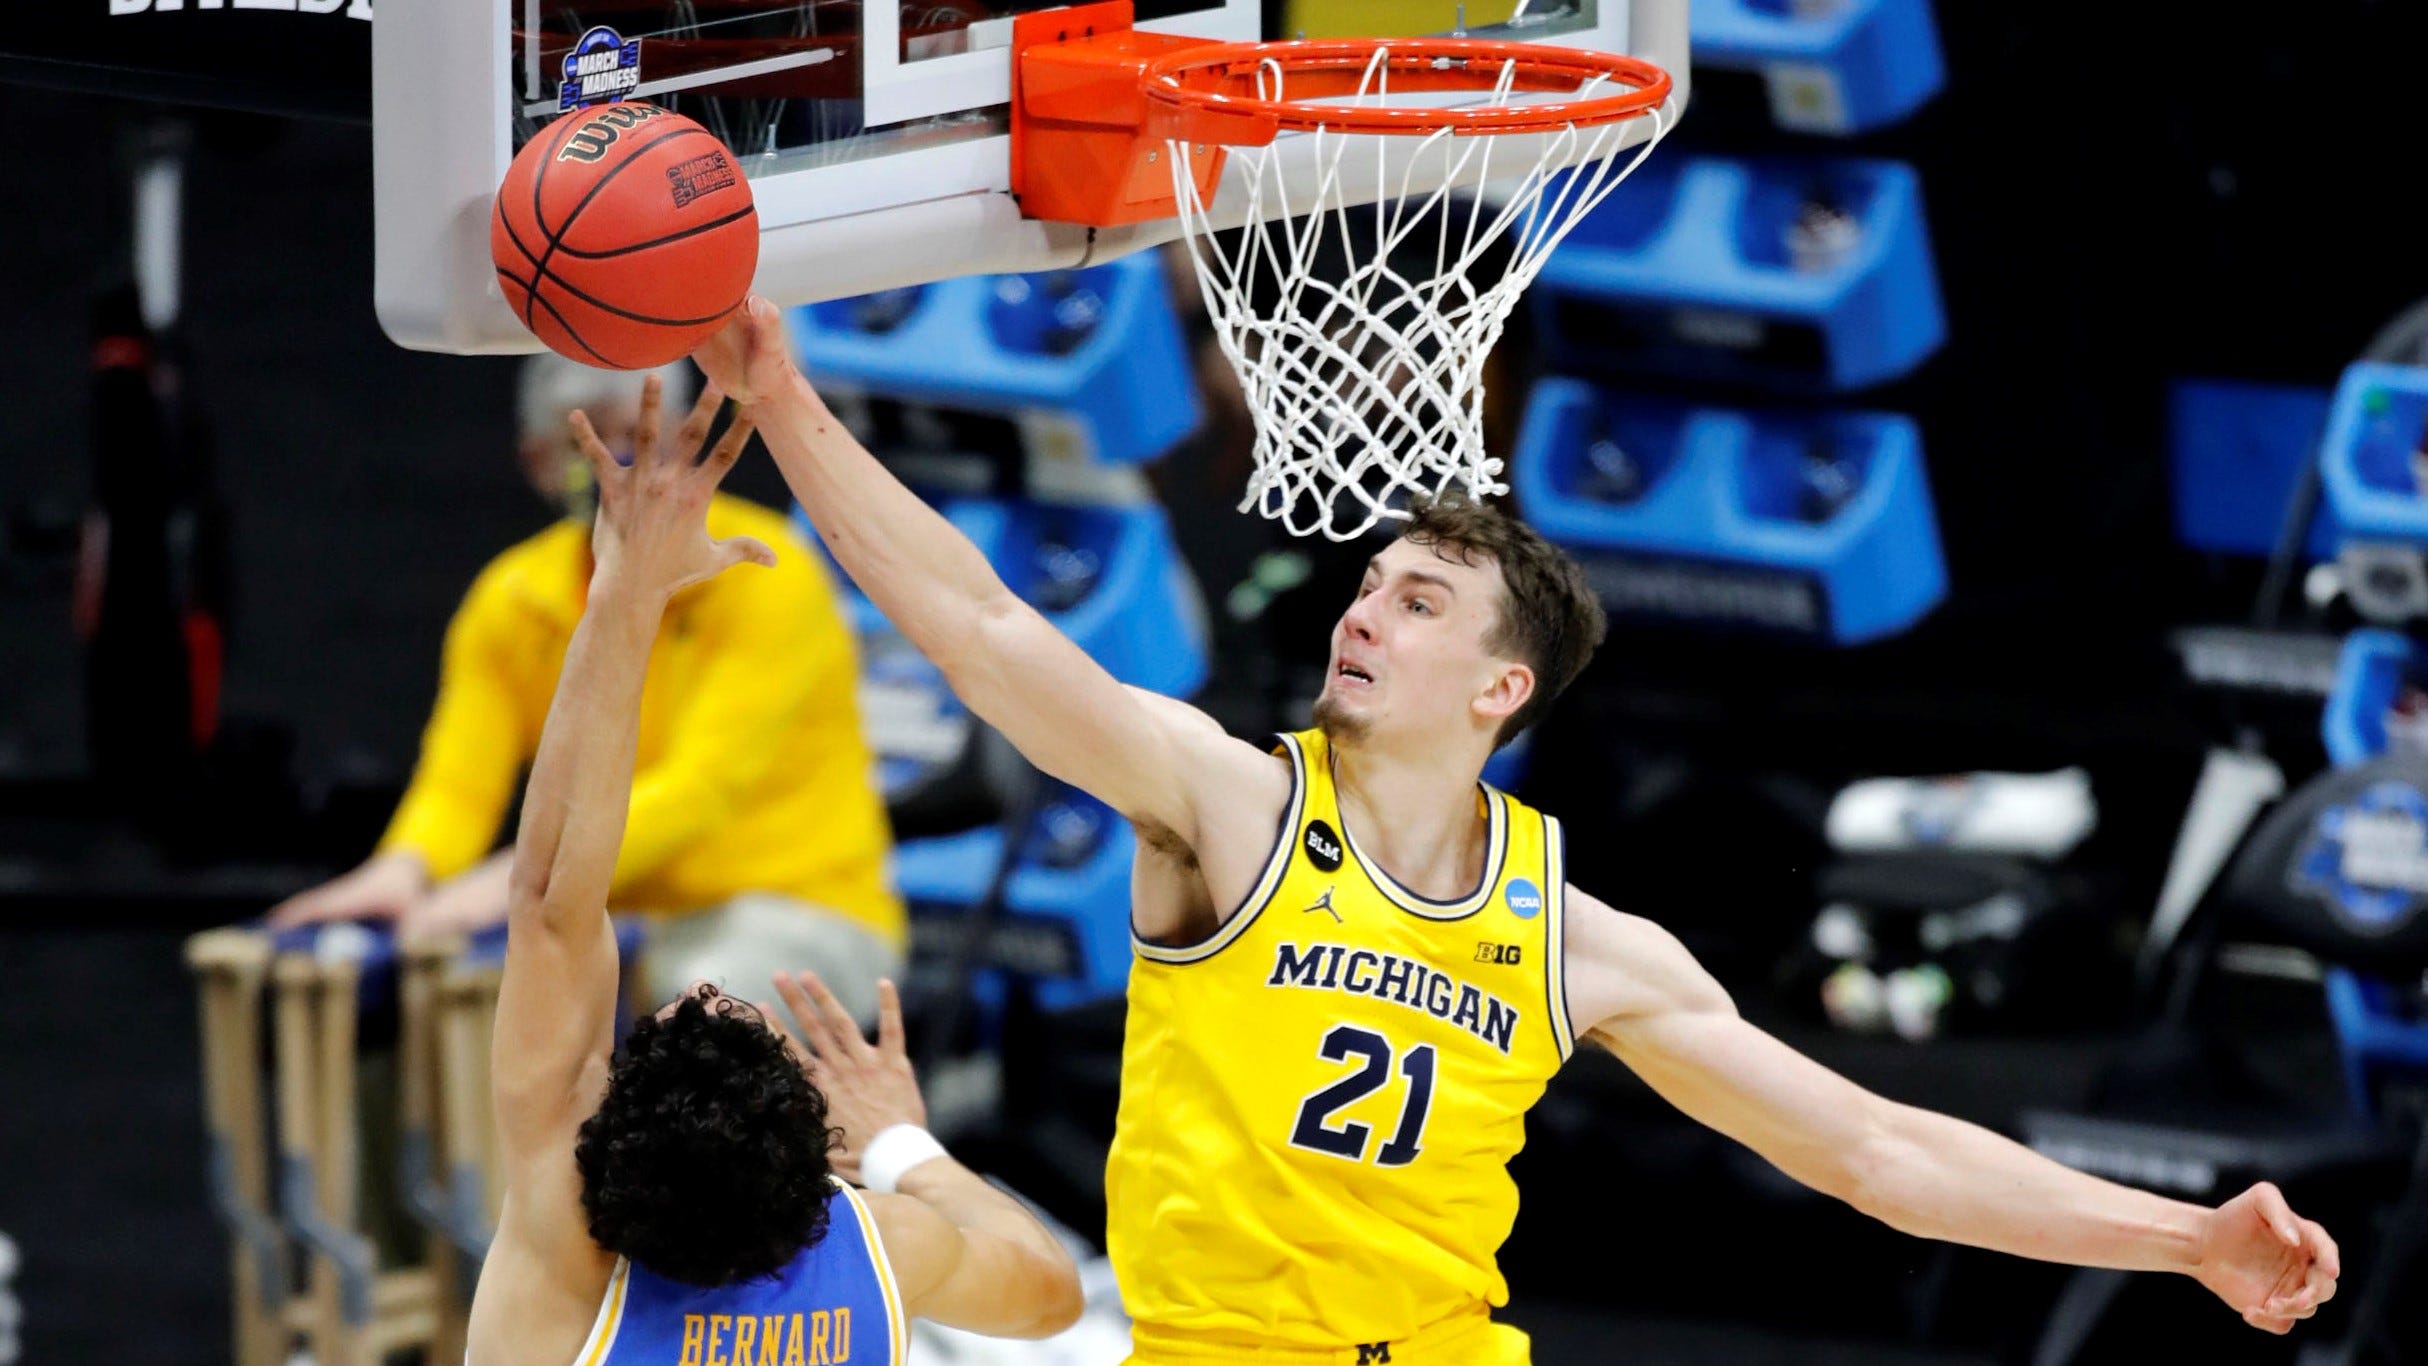 Michigan Wolverines guard Franz Wagner (21) blocks a shot by UCLA Bruins guard Jules Bernard (1) during the Elite Eight round of the 2021 NCAA Tournament on Tuesday, March 30, 2021, at Lucas Oil Stadium in Indianapolis, Ind. Mandatory Credit: Michelle Pemberton/IndyStar via USA TODAY Sports ORIG FILE ID:  20210330_jla_usa_094.jpg